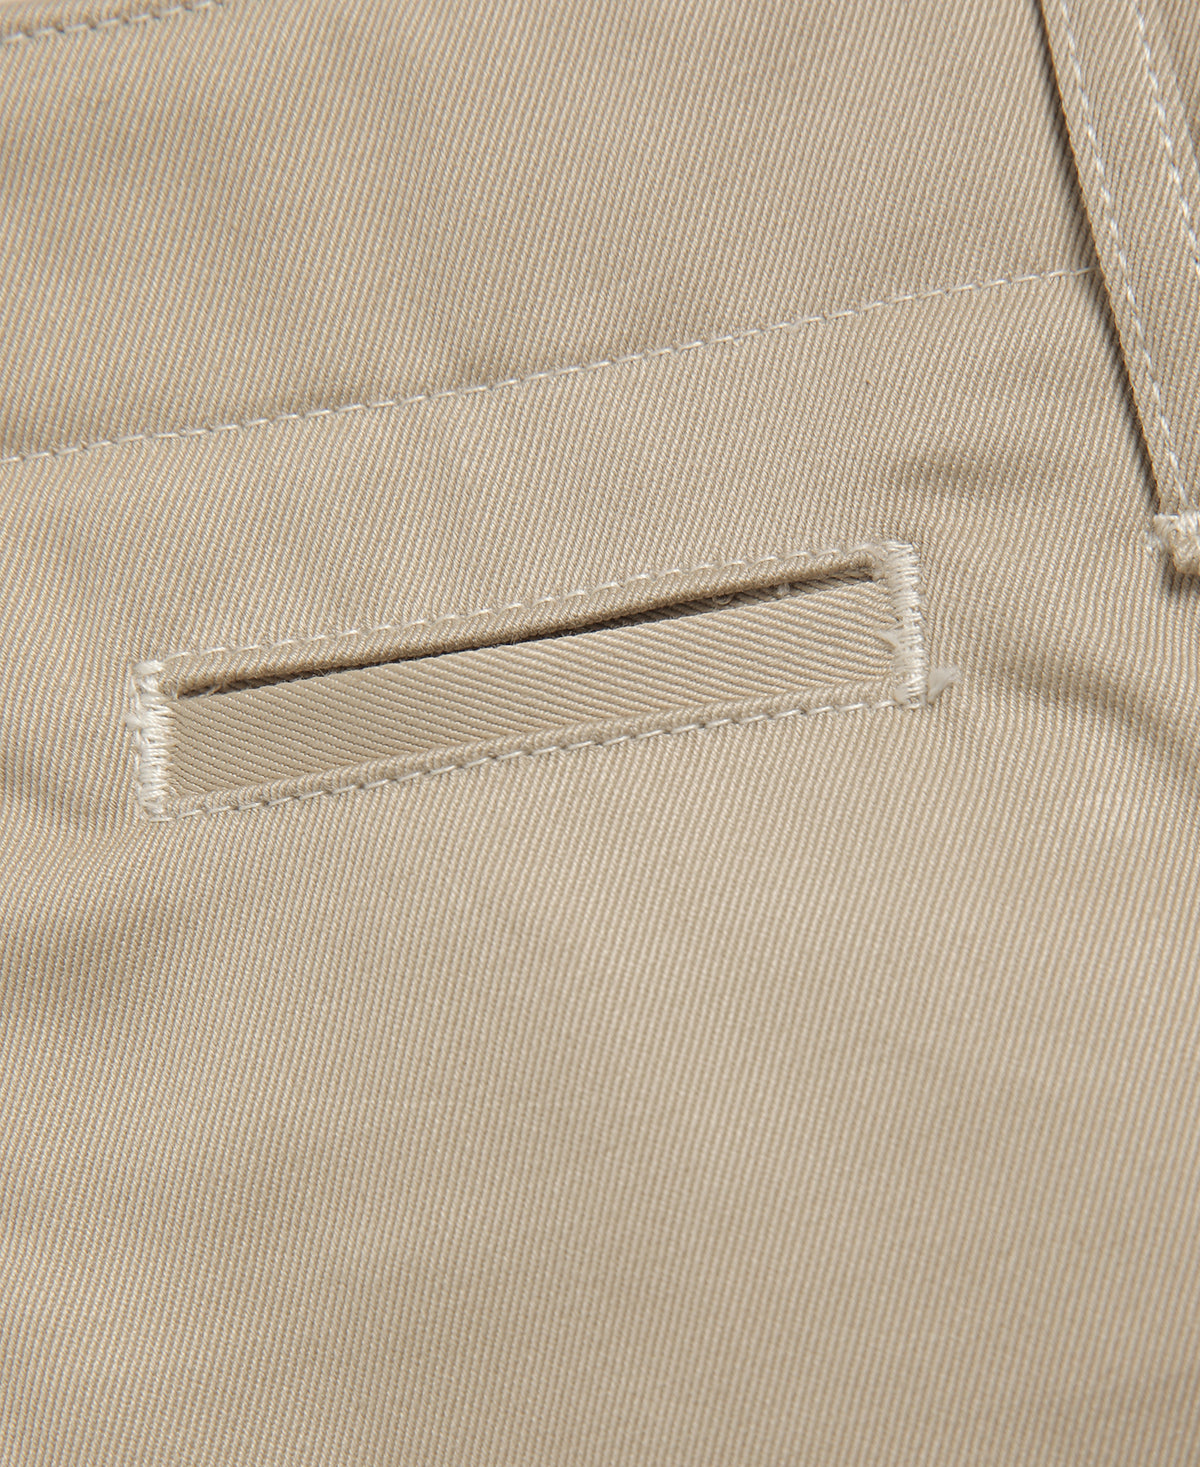 1950s US Army 14 oz Officer Chino Trousers - Khaki